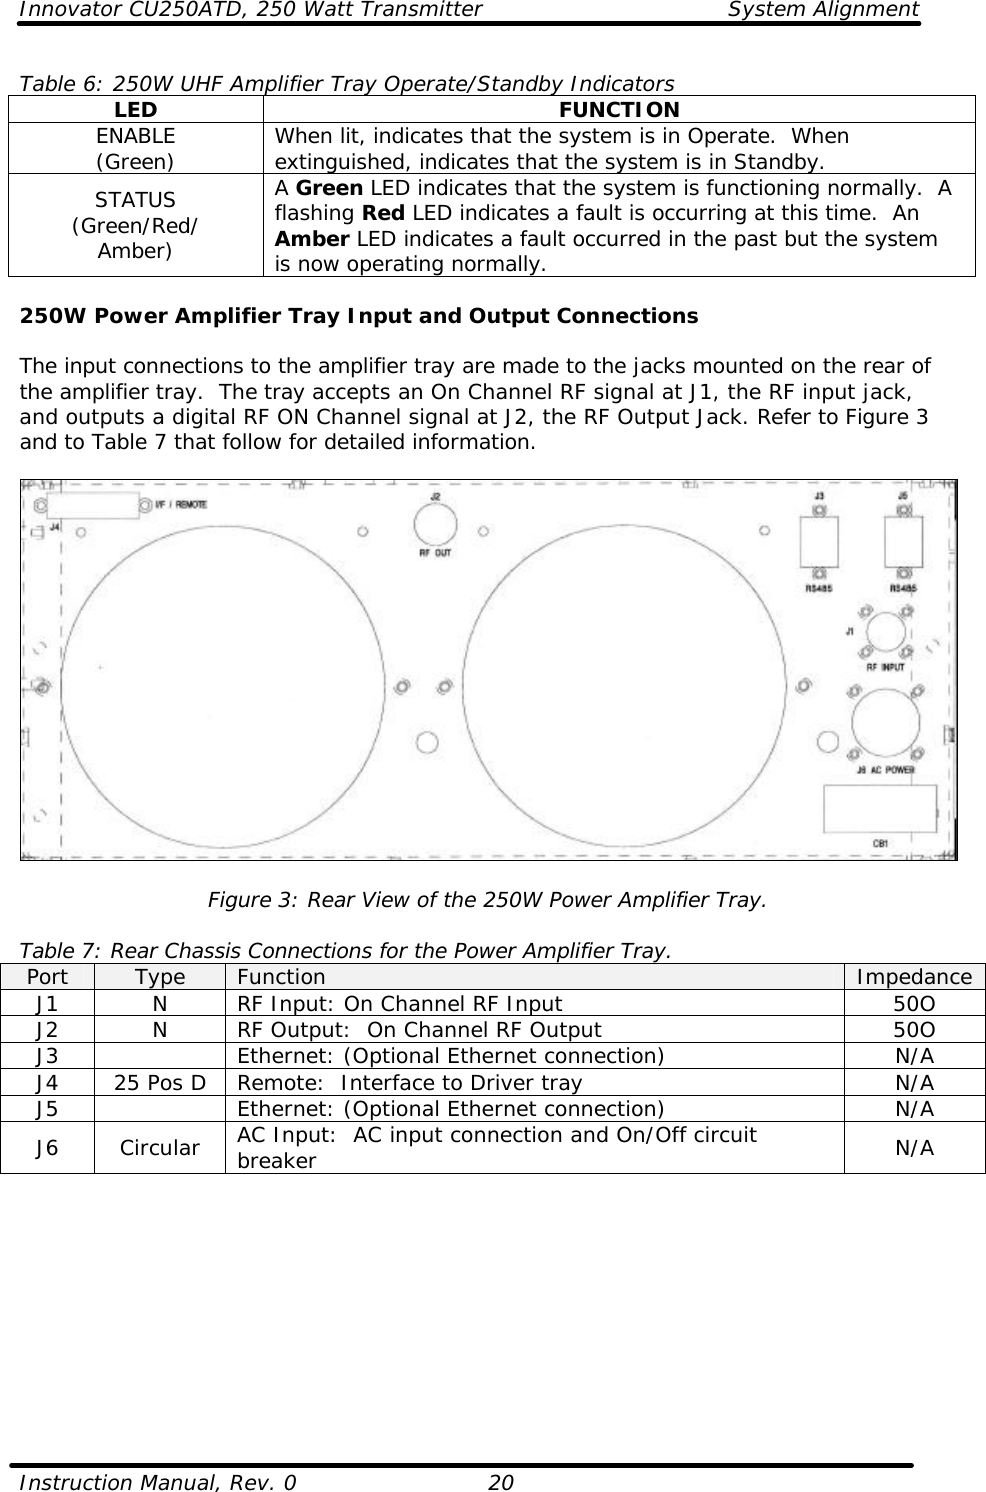 Innovator CU250ATD, 250 Watt Transmitter System Alignment  Instruction Manual, Rev. 0    20 Table 6: 250W UHF Amplifier Tray Operate/Standby Indicators LED FUNCTION ENABLE (Green) When lit, indicates that the system is in Operate.  When extinguished, indicates that the system is in Standby. STATUS (Green/Red/ Amber) A Green LED indicates that the system is functioning normally.  A flashing Red LED indicates a fault is occurring at this time.  An Amber LED indicates a fault occurred in the past but the system is now operating normally.  250W Power Amplifier Tray Input and Output Connections  The input connections to the amplifier tray are made to the jacks mounted on the rear of the amplifier tray.  The tray accepts an On Channel RF signal at J1, the RF input jack, and outputs a digital RF ON Channel signal at J2, the RF Output Jack. Refer to Figure 3 and to Table 7 that follow for detailed information.    Figure 3: Rear View of the 250W Power Amplifier Tray.  Table 7: Rear Chassis Connections for the Power Amplifier Tray. Port Type Function Impedance J1 N RF Input: On Channel RF Input 50O J2 N RF Output:  On Channel RF Output 50O J3    Ethernet: (Optional Ethernet connection) N/A J4 25 Pos D Remote:  Interface to Driver tray N/A J5    Ethernet: (Optional Ethernet connection) N/A J6 Circular AC Input:  AC input connection and On/Off circuit breaker N/A 